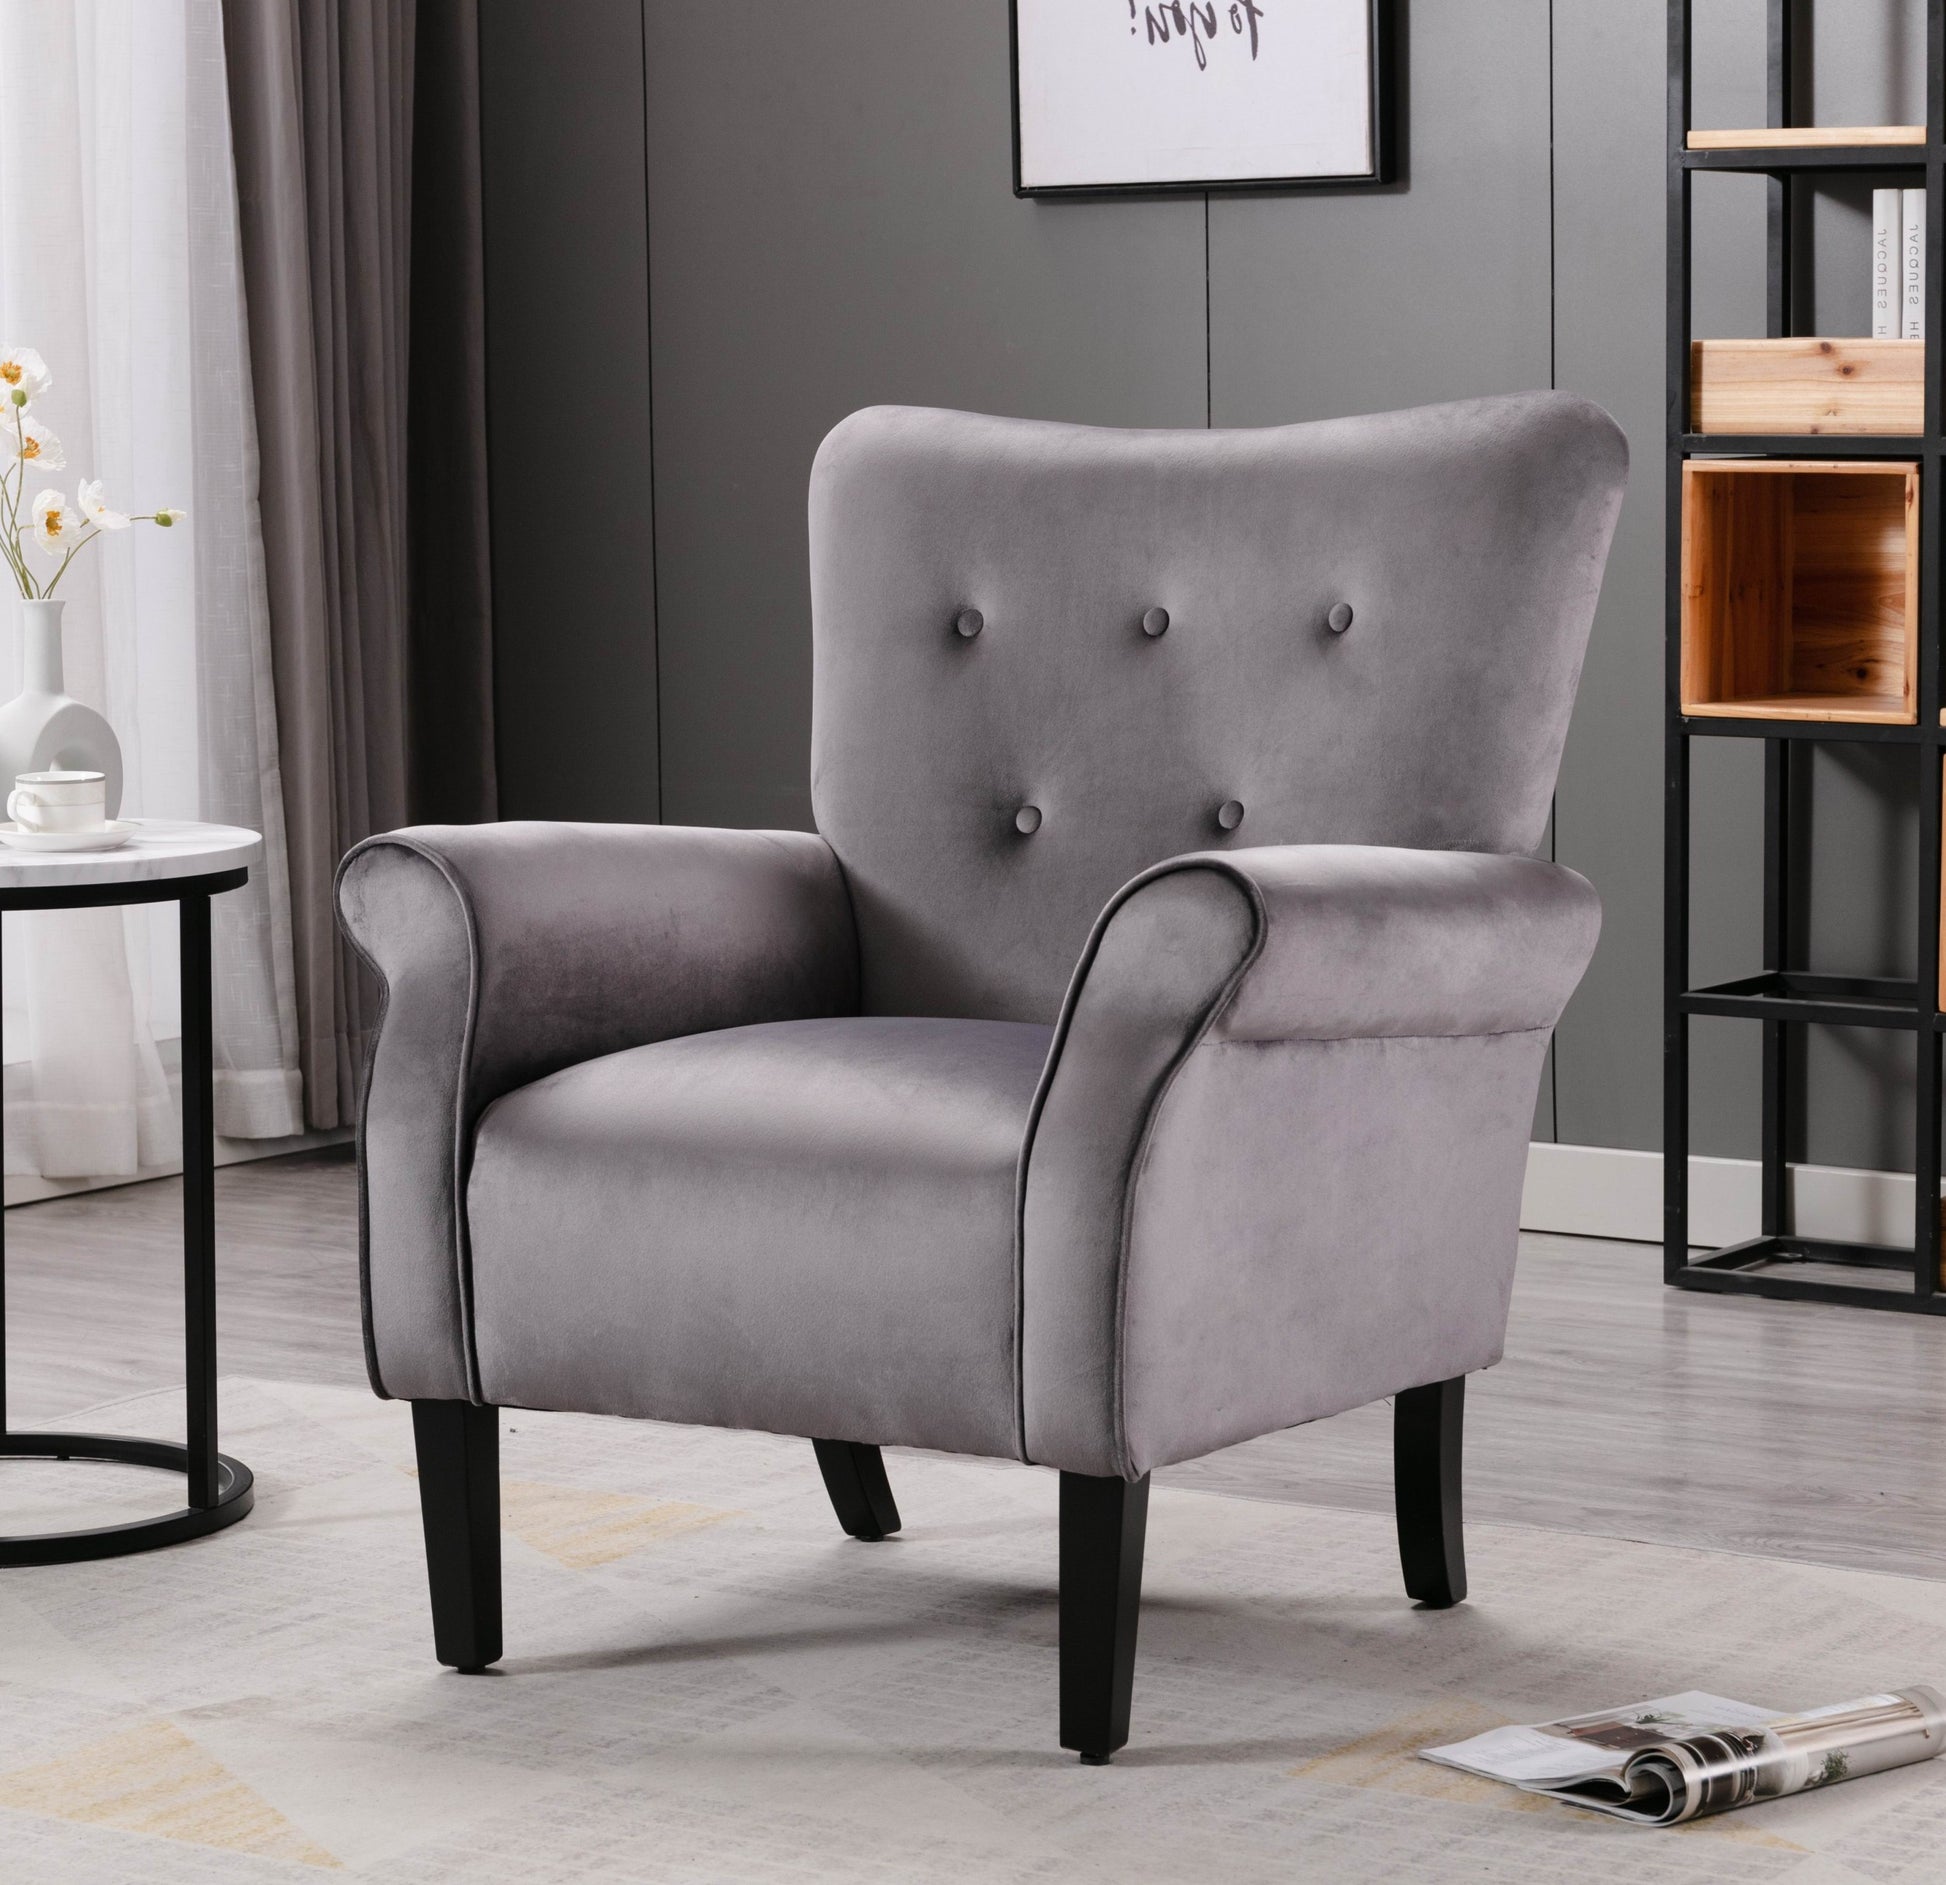 Stylish Living Room Furniture 1pc Accent Chair Grey grey-primary living space-luxury-modern-solid